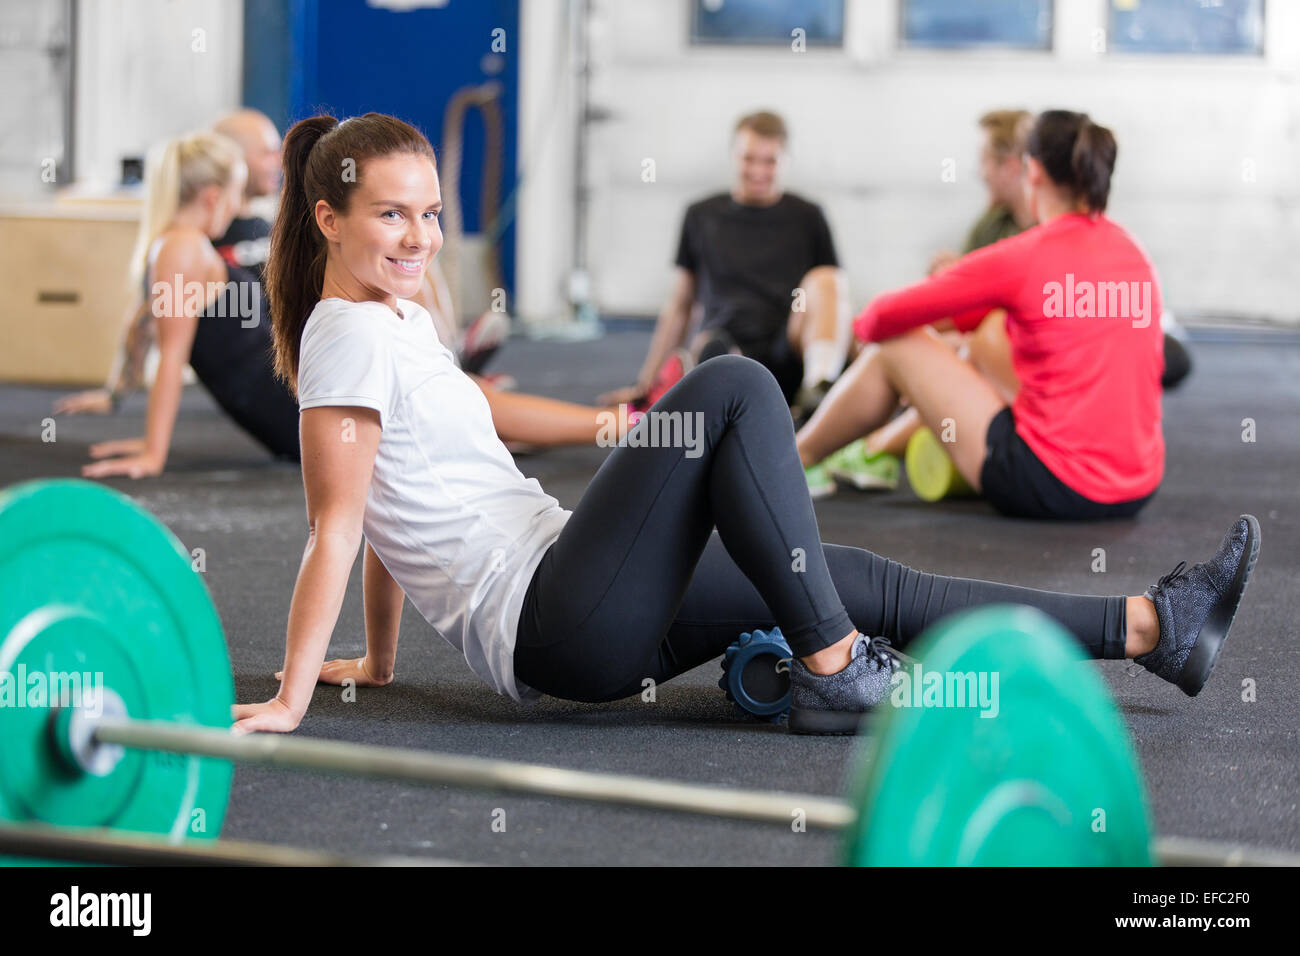 Crossfit exercise for flexibility and mobility Stock Photo